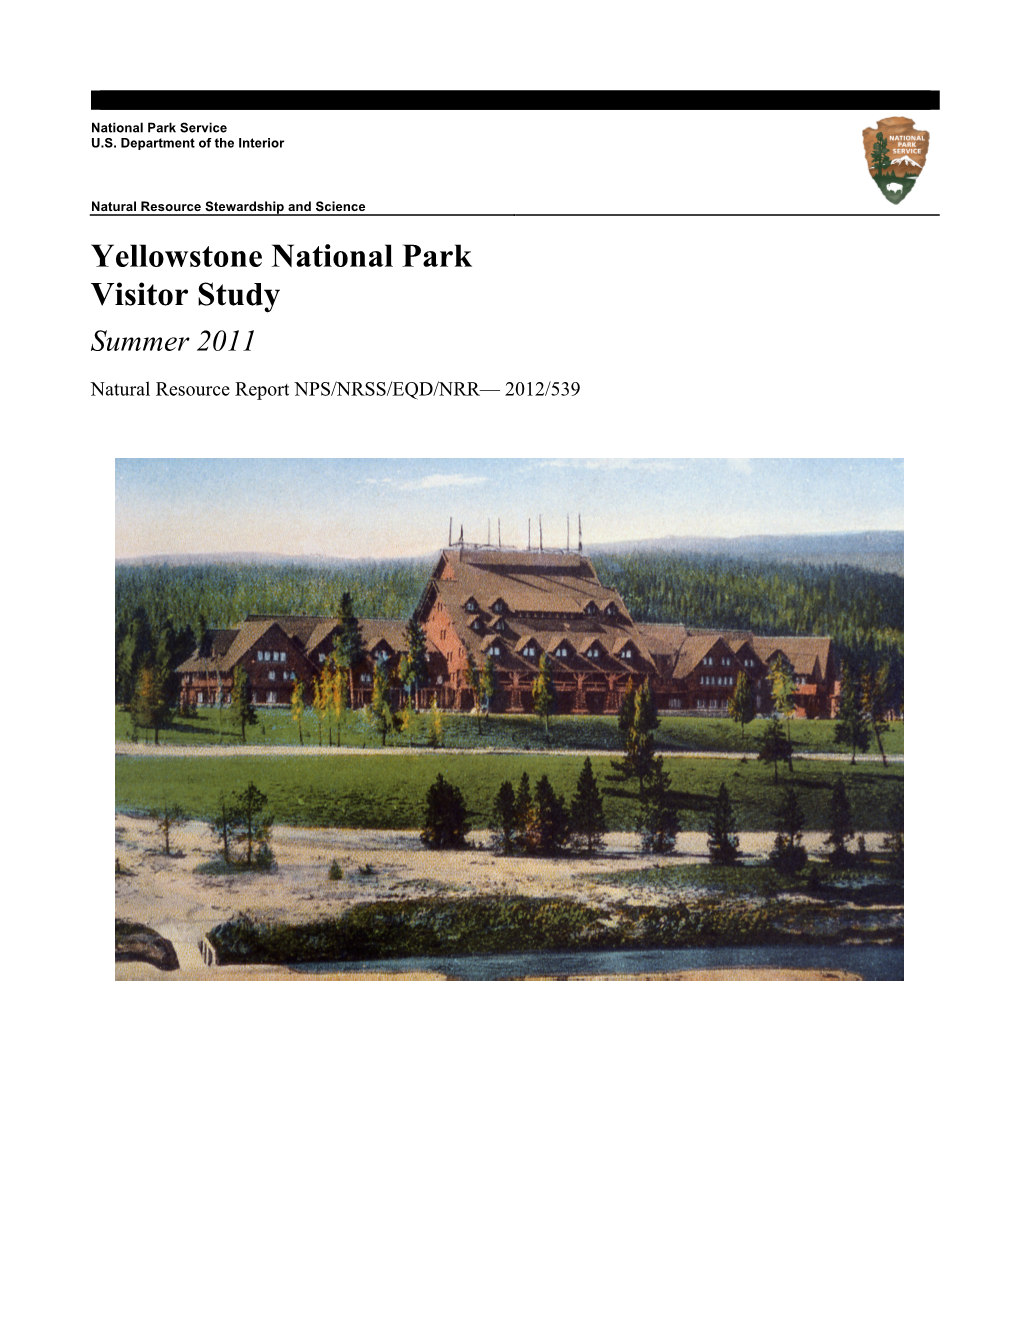 Yellowstone National Park Visitor Study Summer 2011